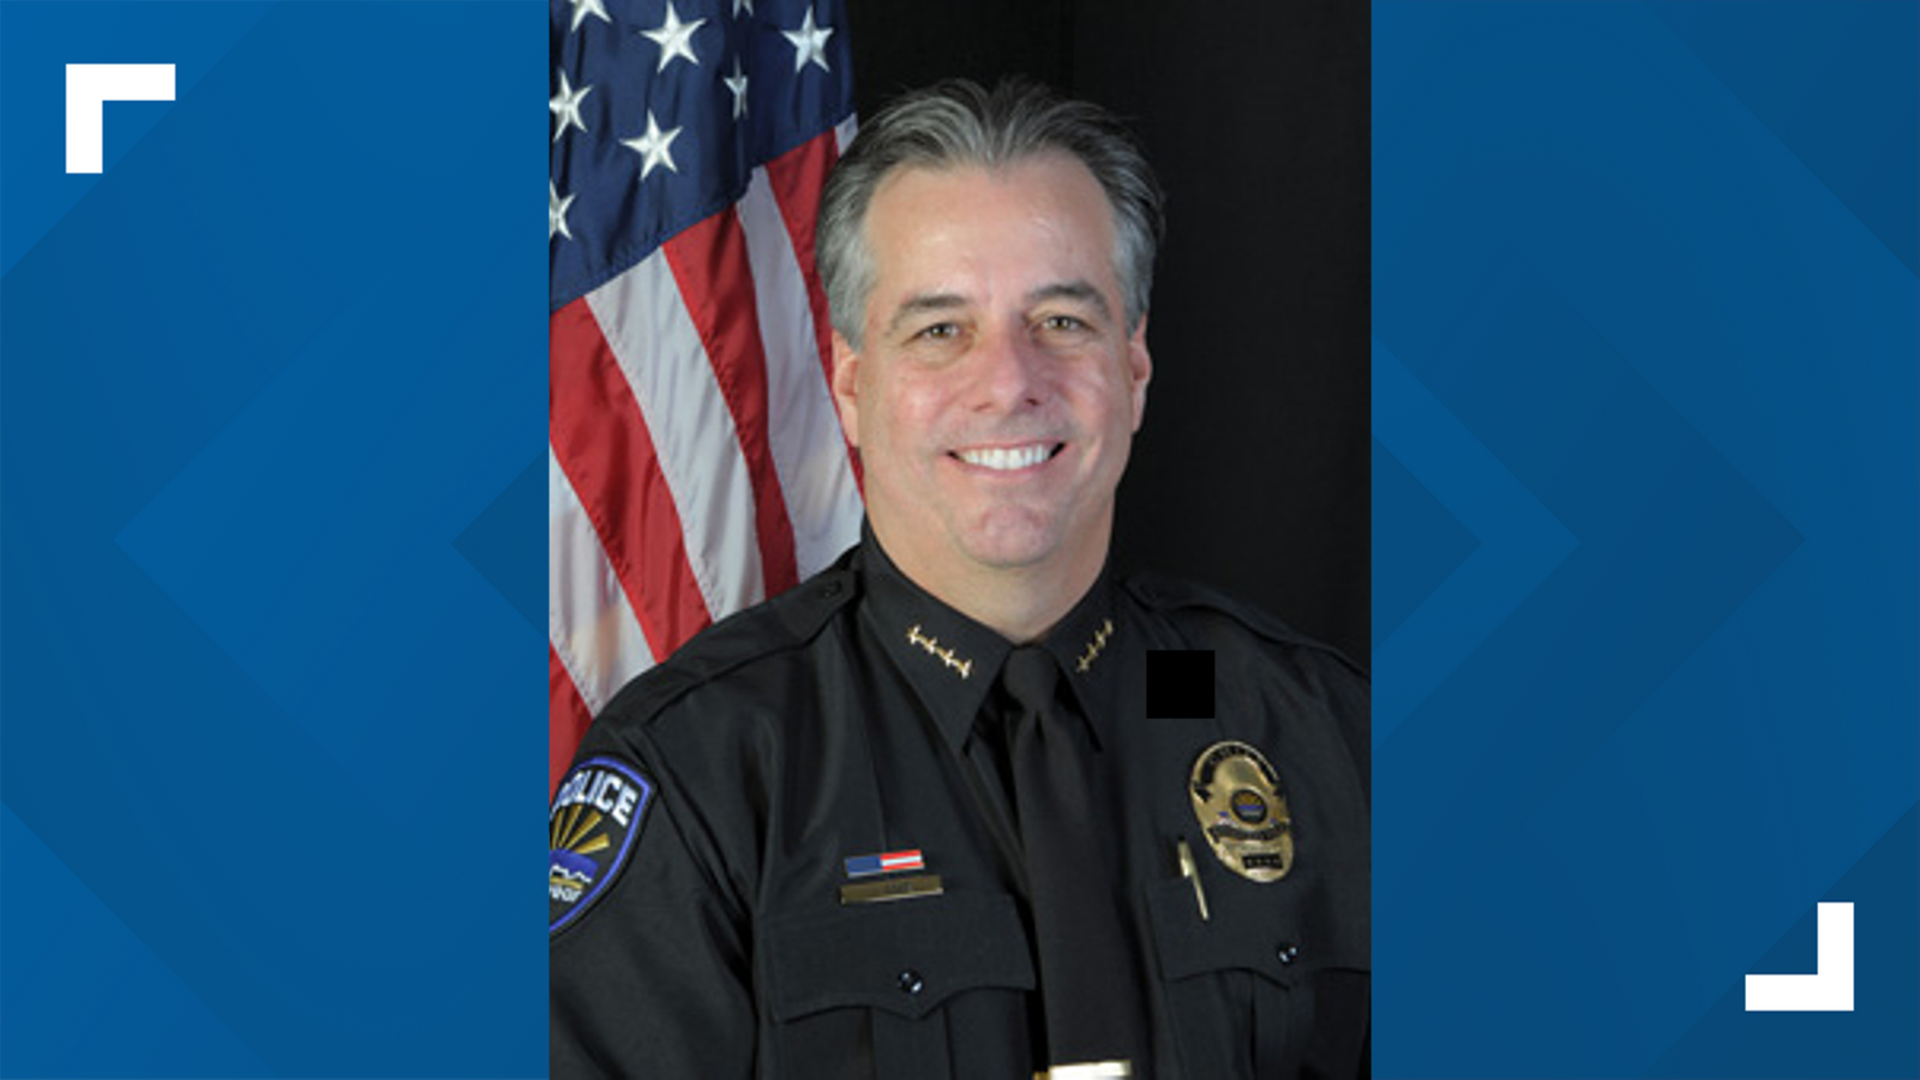 Jerry Geier was terminated as police chief of Goodyear Friday. He had been placed on administrative leave in October following allegations of misconduct.